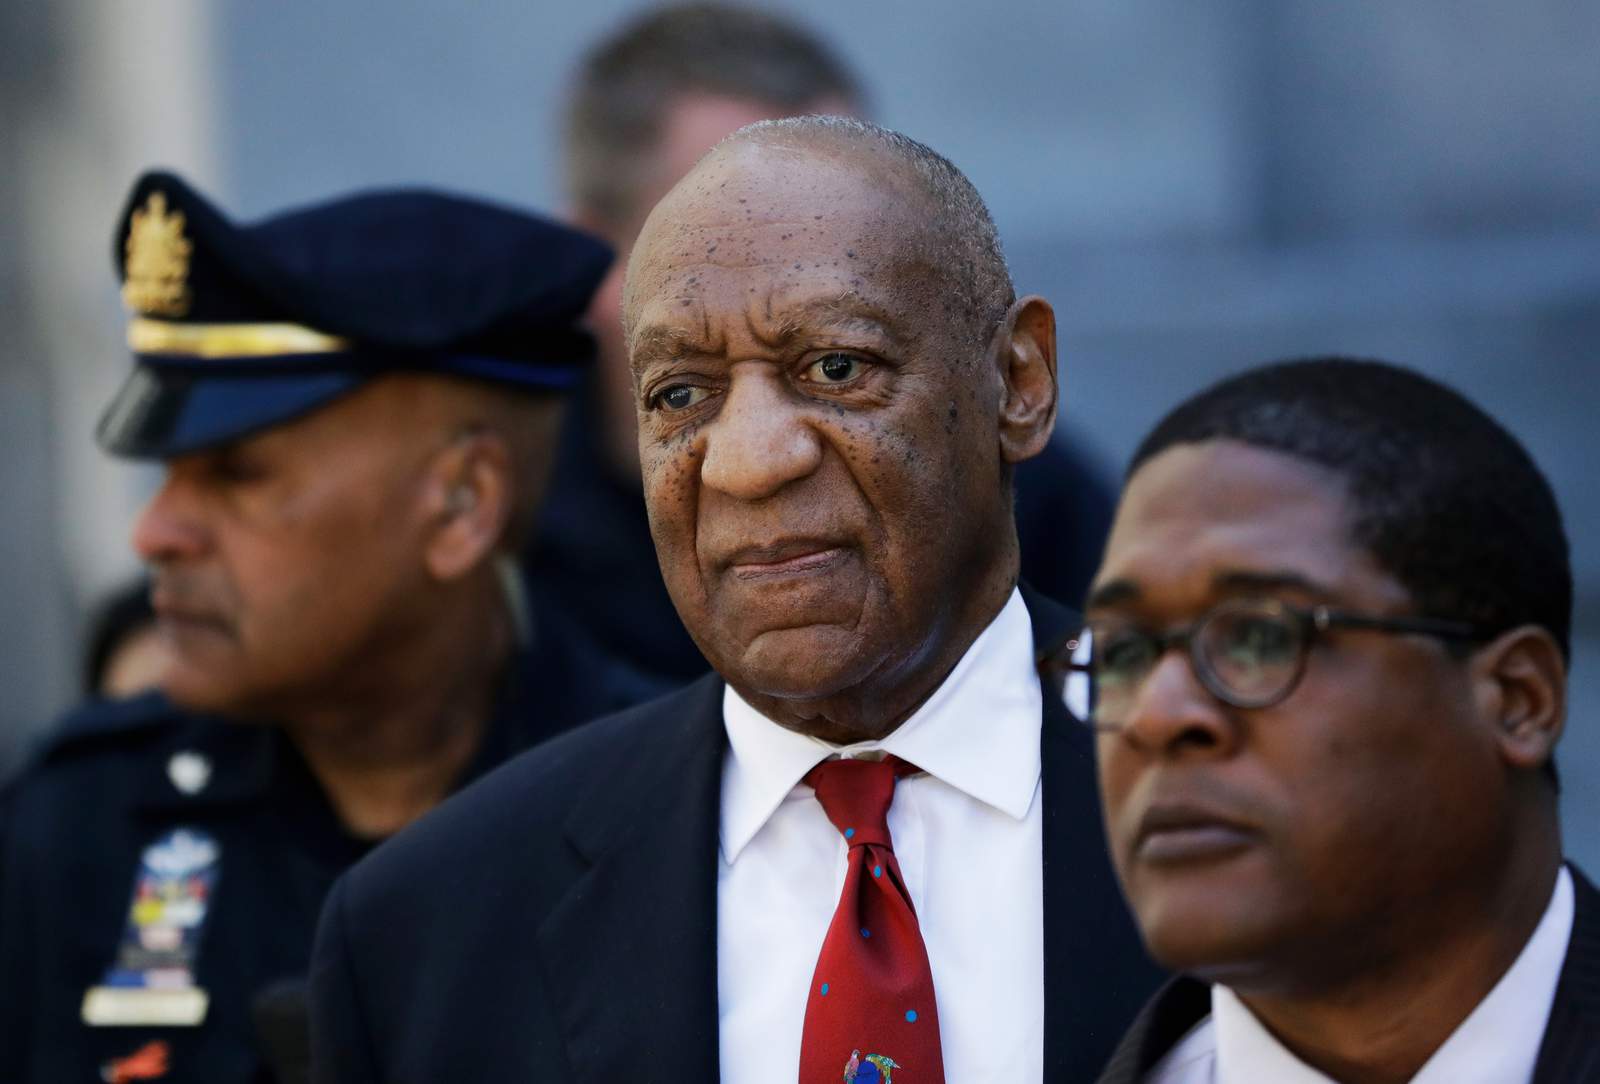 Cosby’s sex assault conviction goes before high-level court